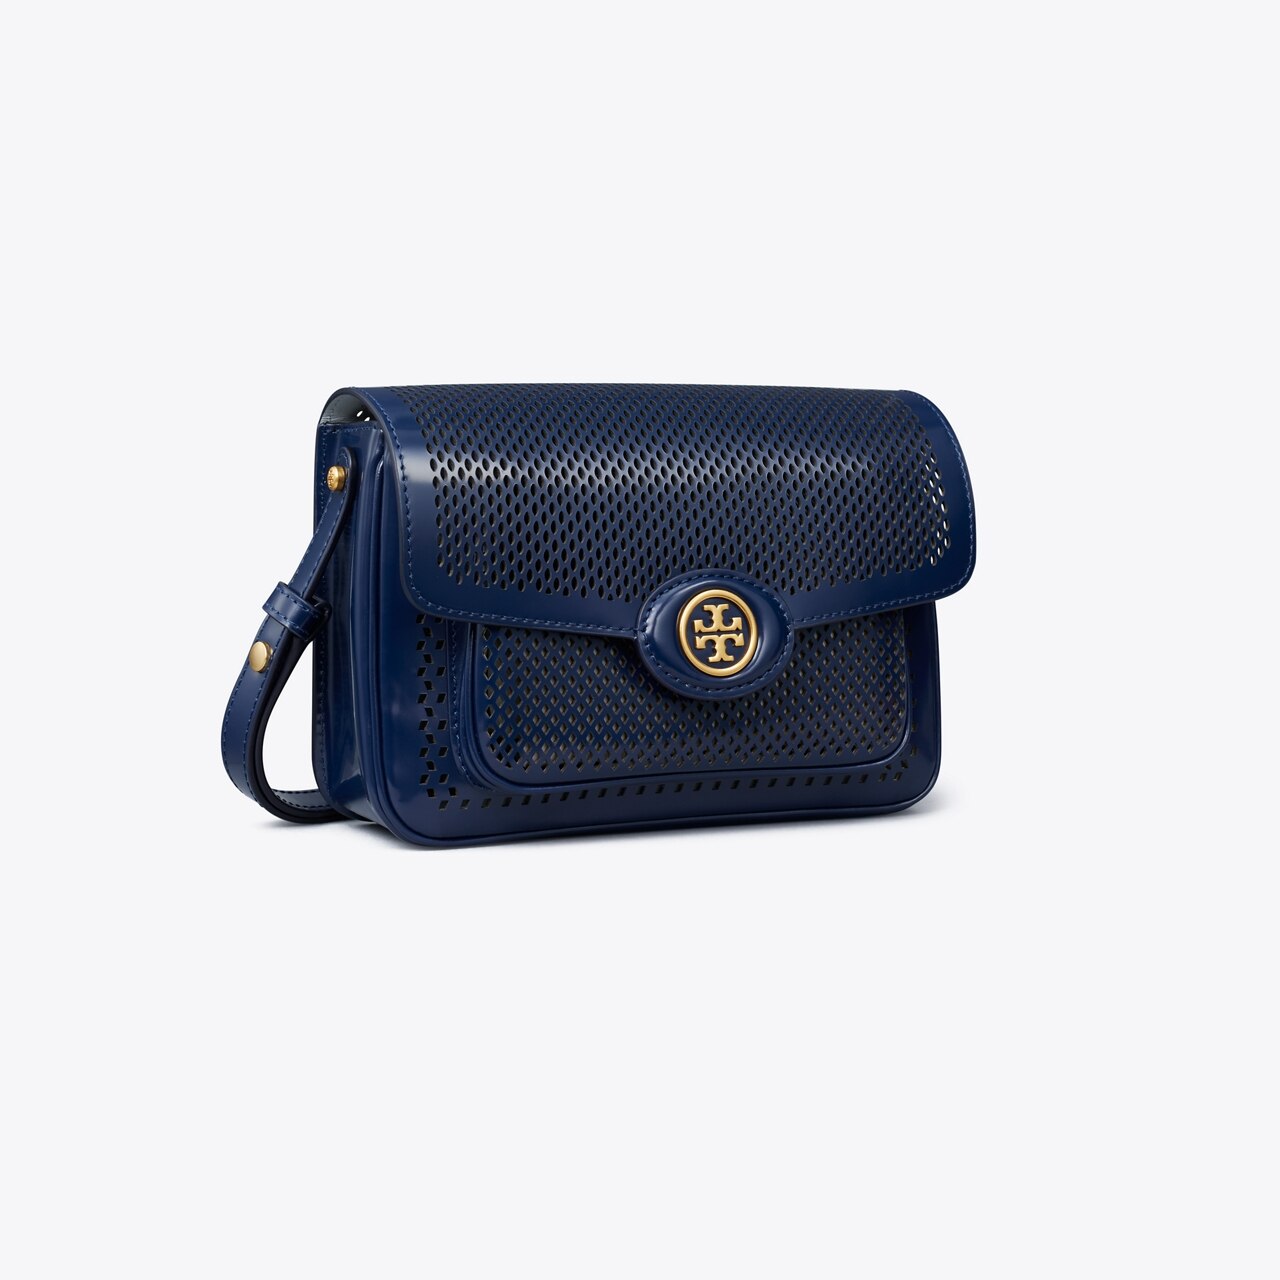 Tory Burch Small Robinson Perforated Leather Satchel